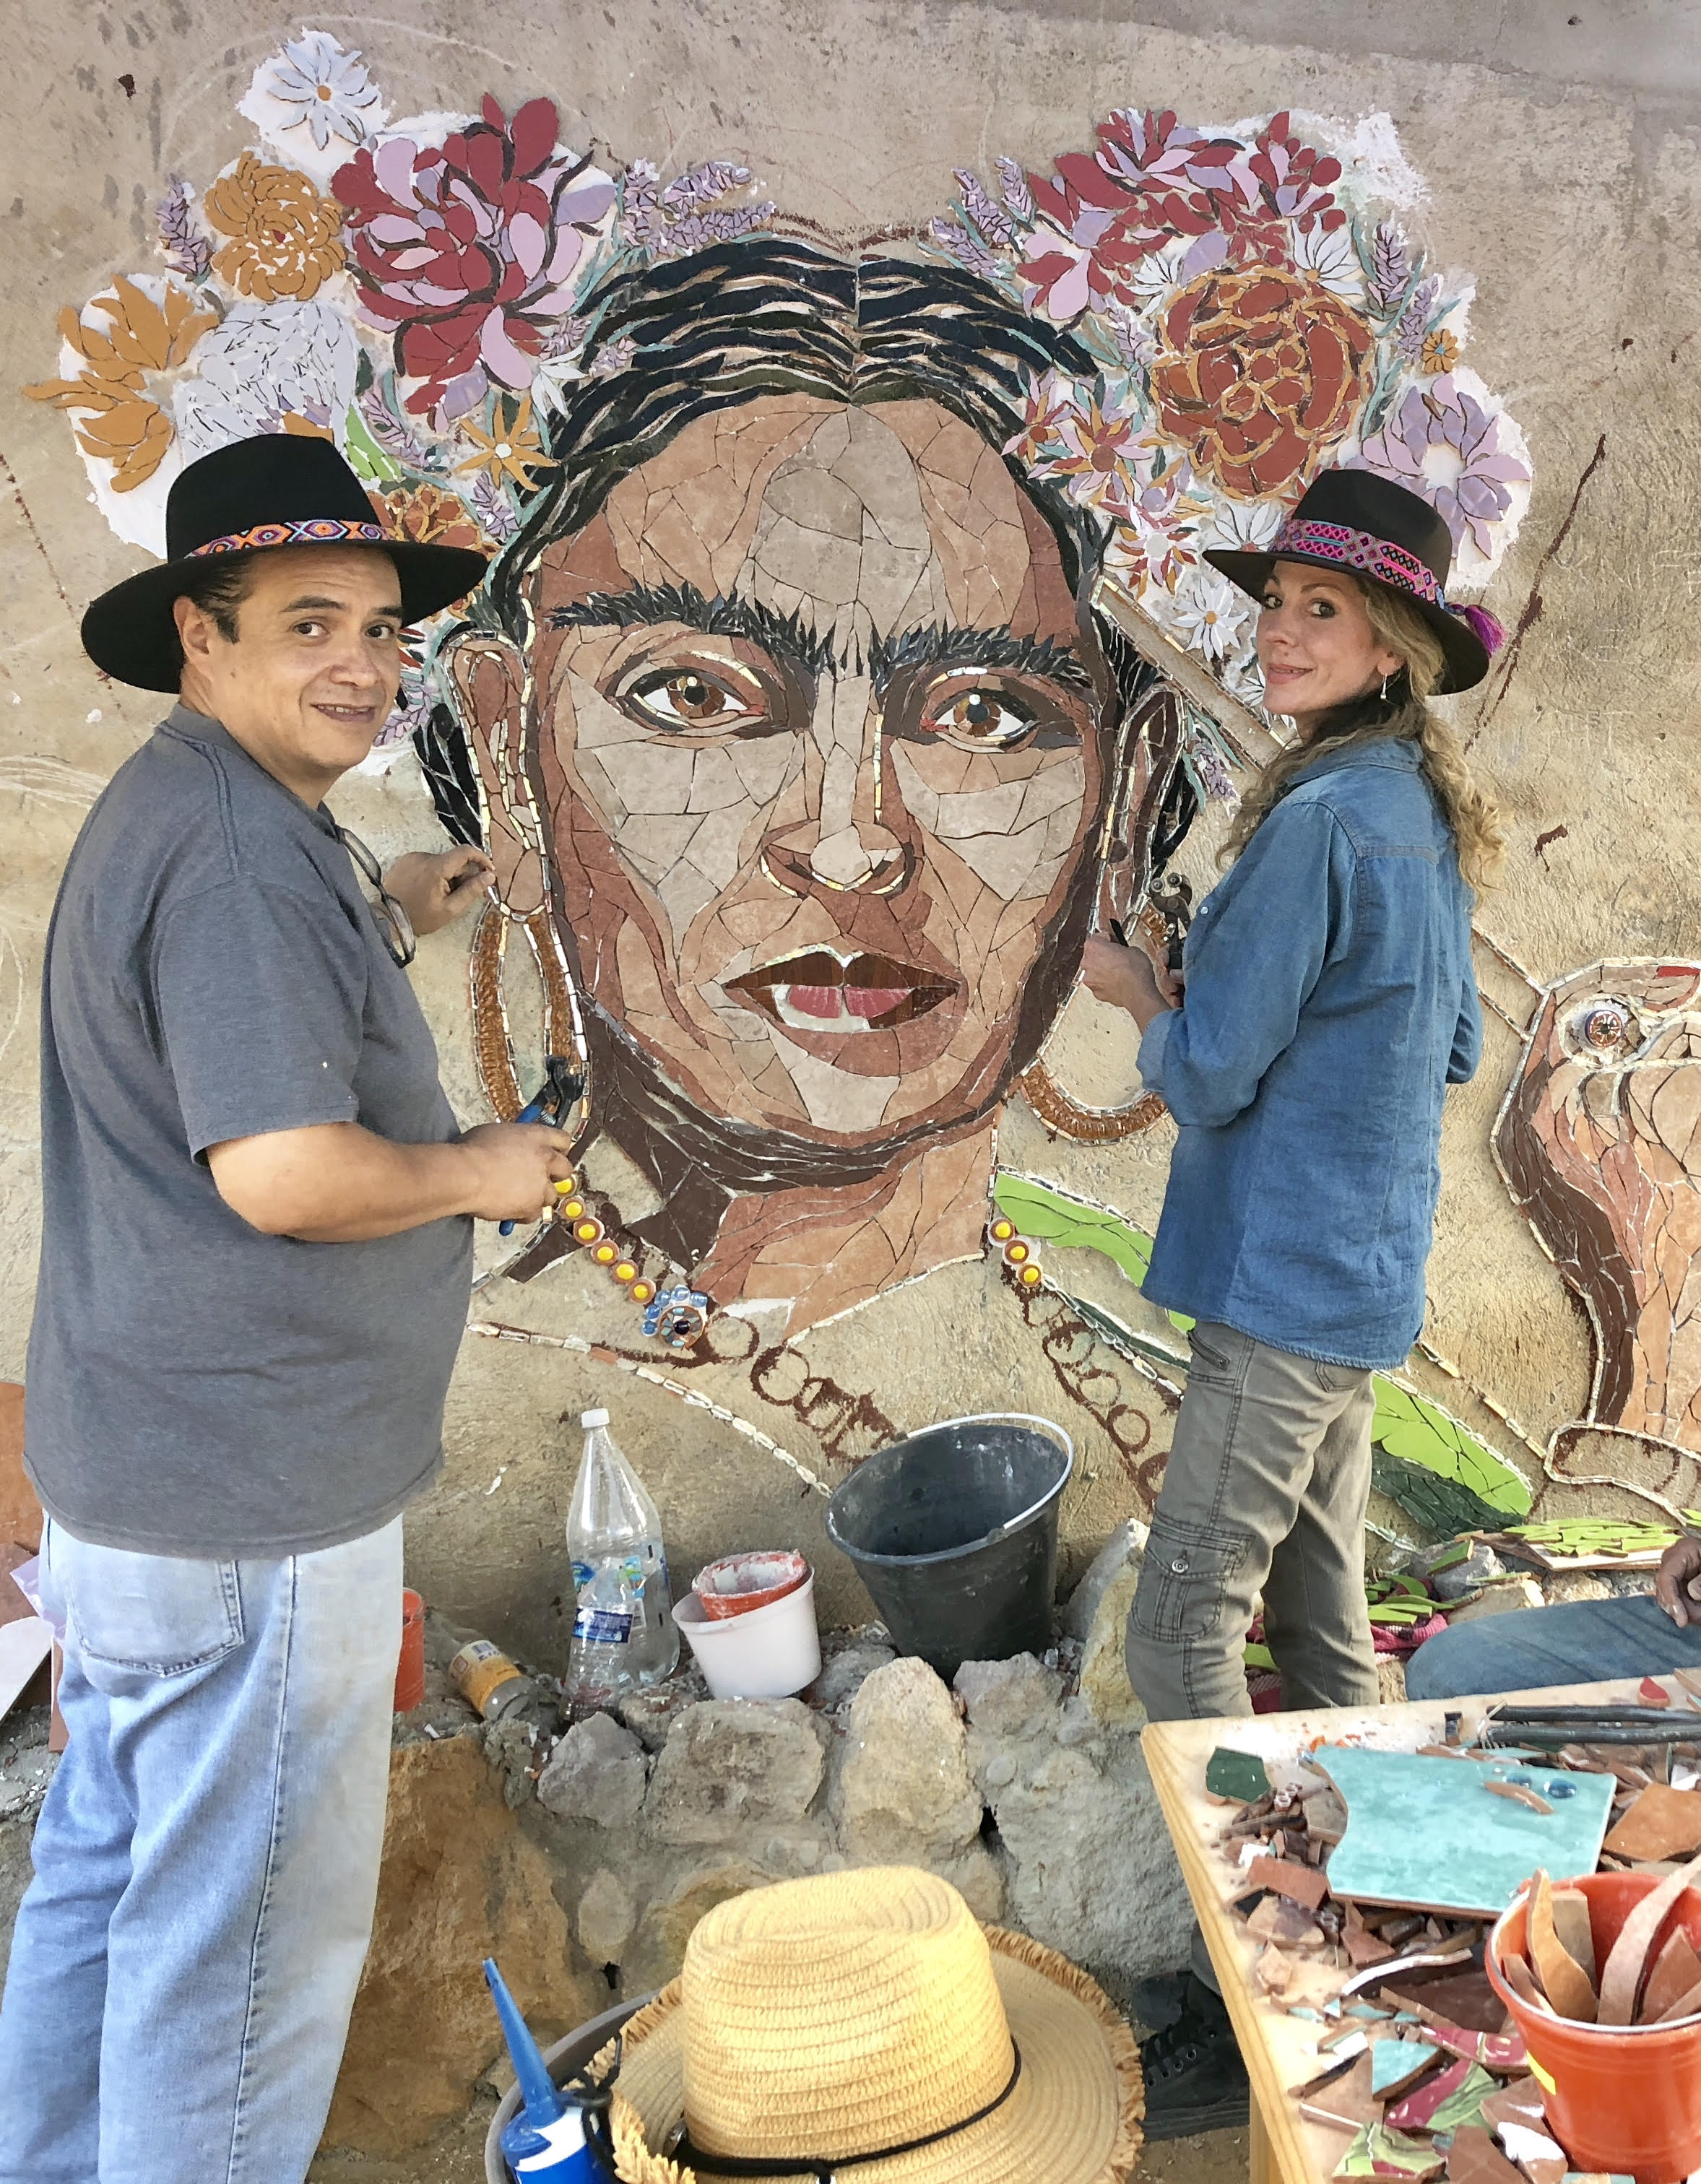 The Fractured Fantasies mural in the mountains of Puebla, Mexico honors Mexican painter Frida Kahlo.